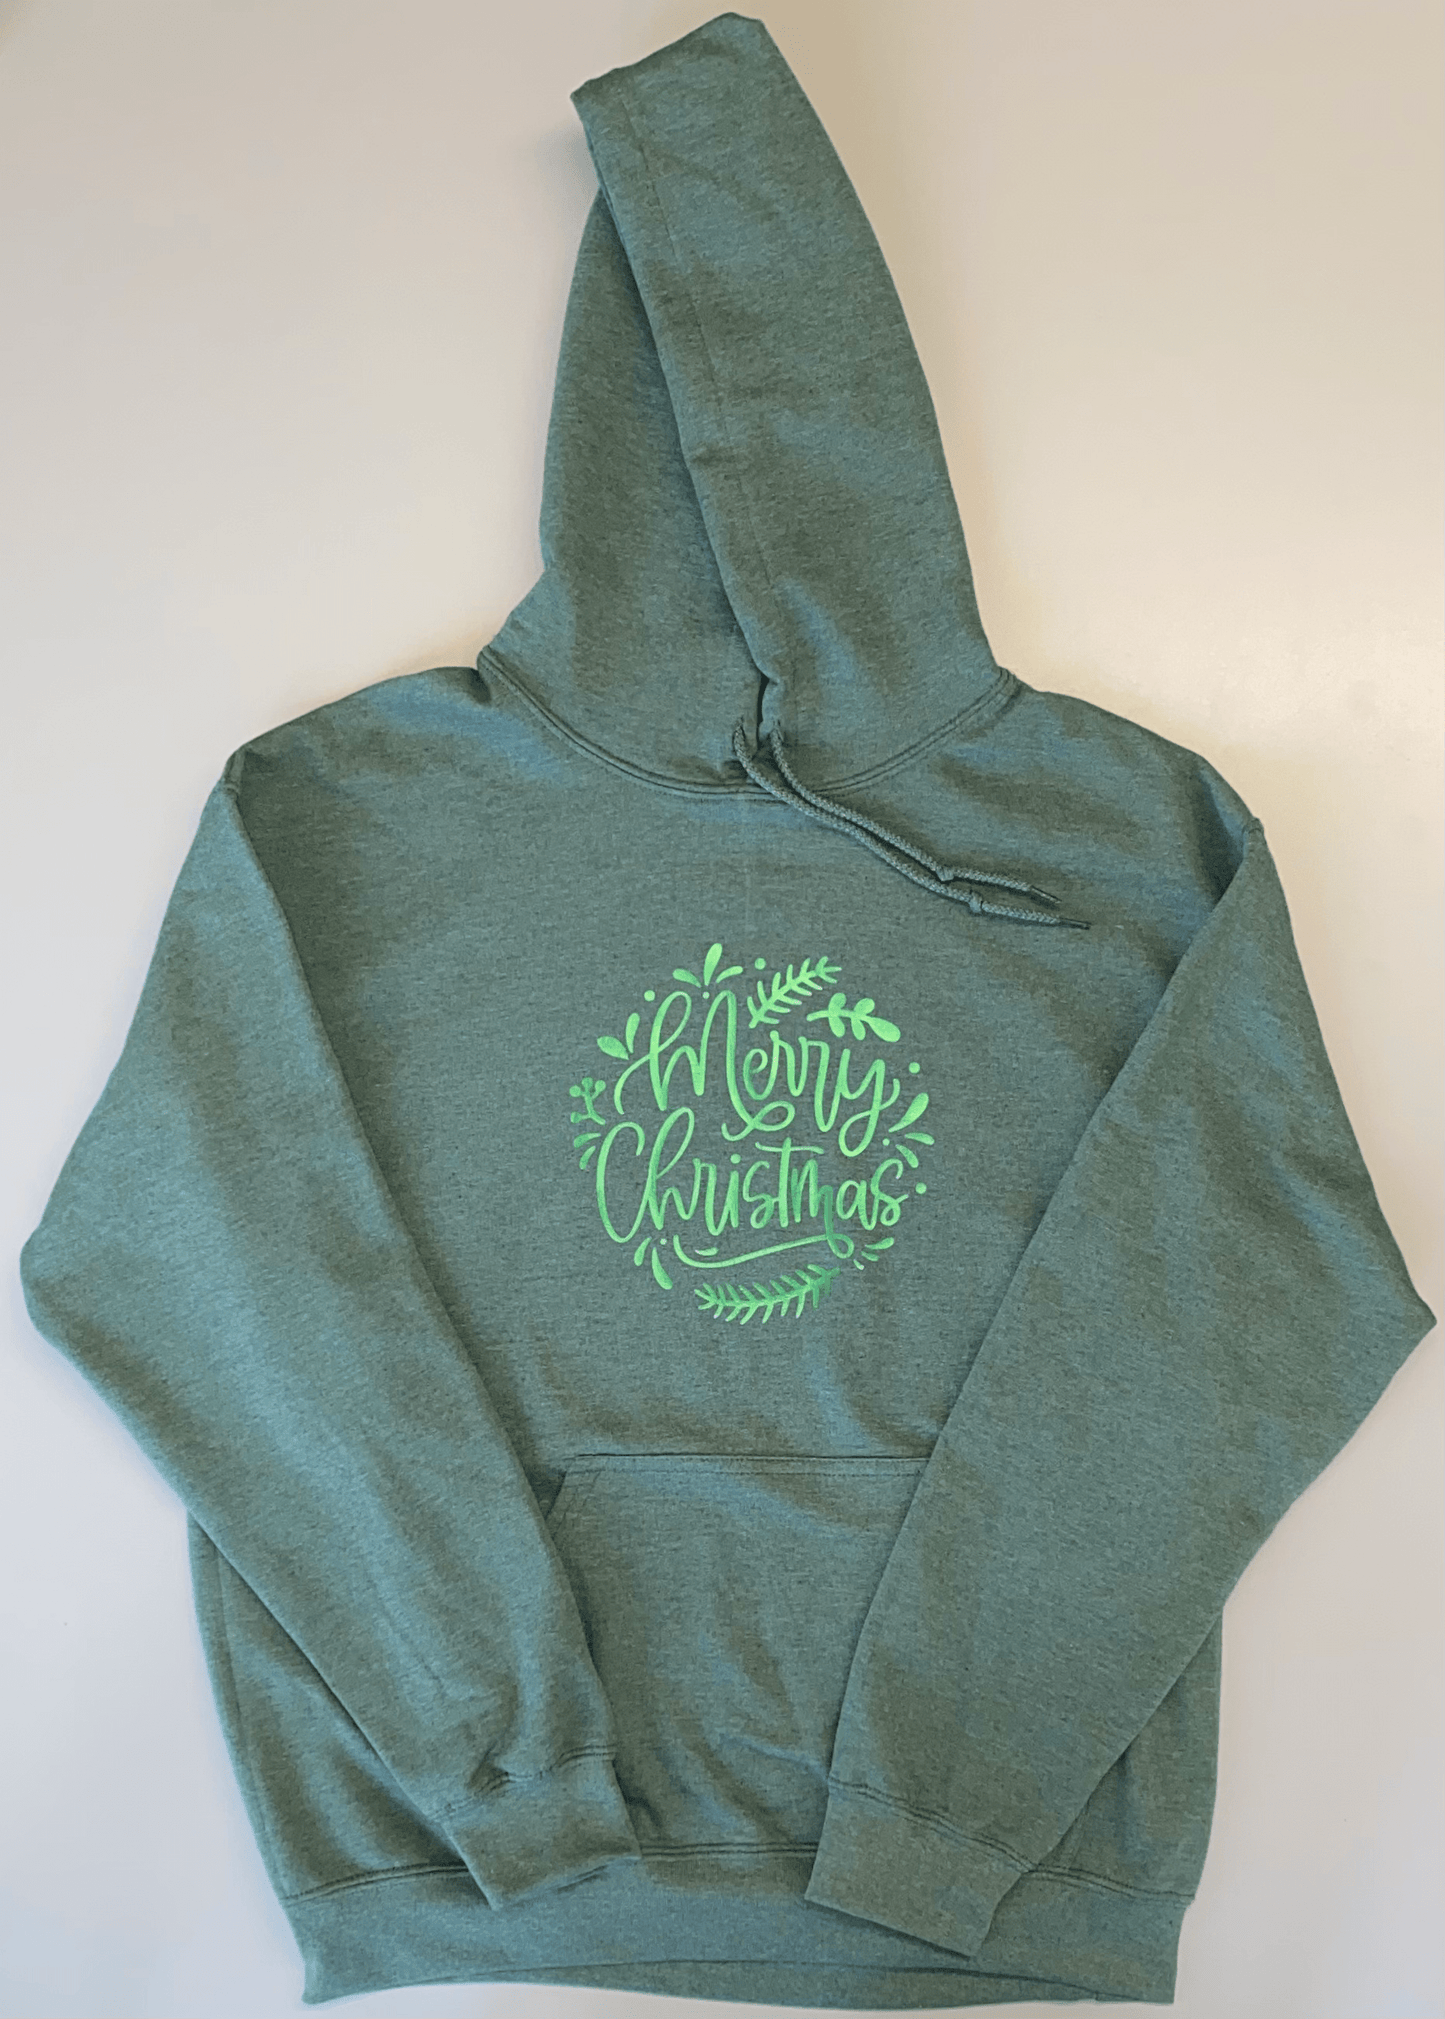 Merry Christmas Hoodie for Holidays. Graphic Hoodies for Family.